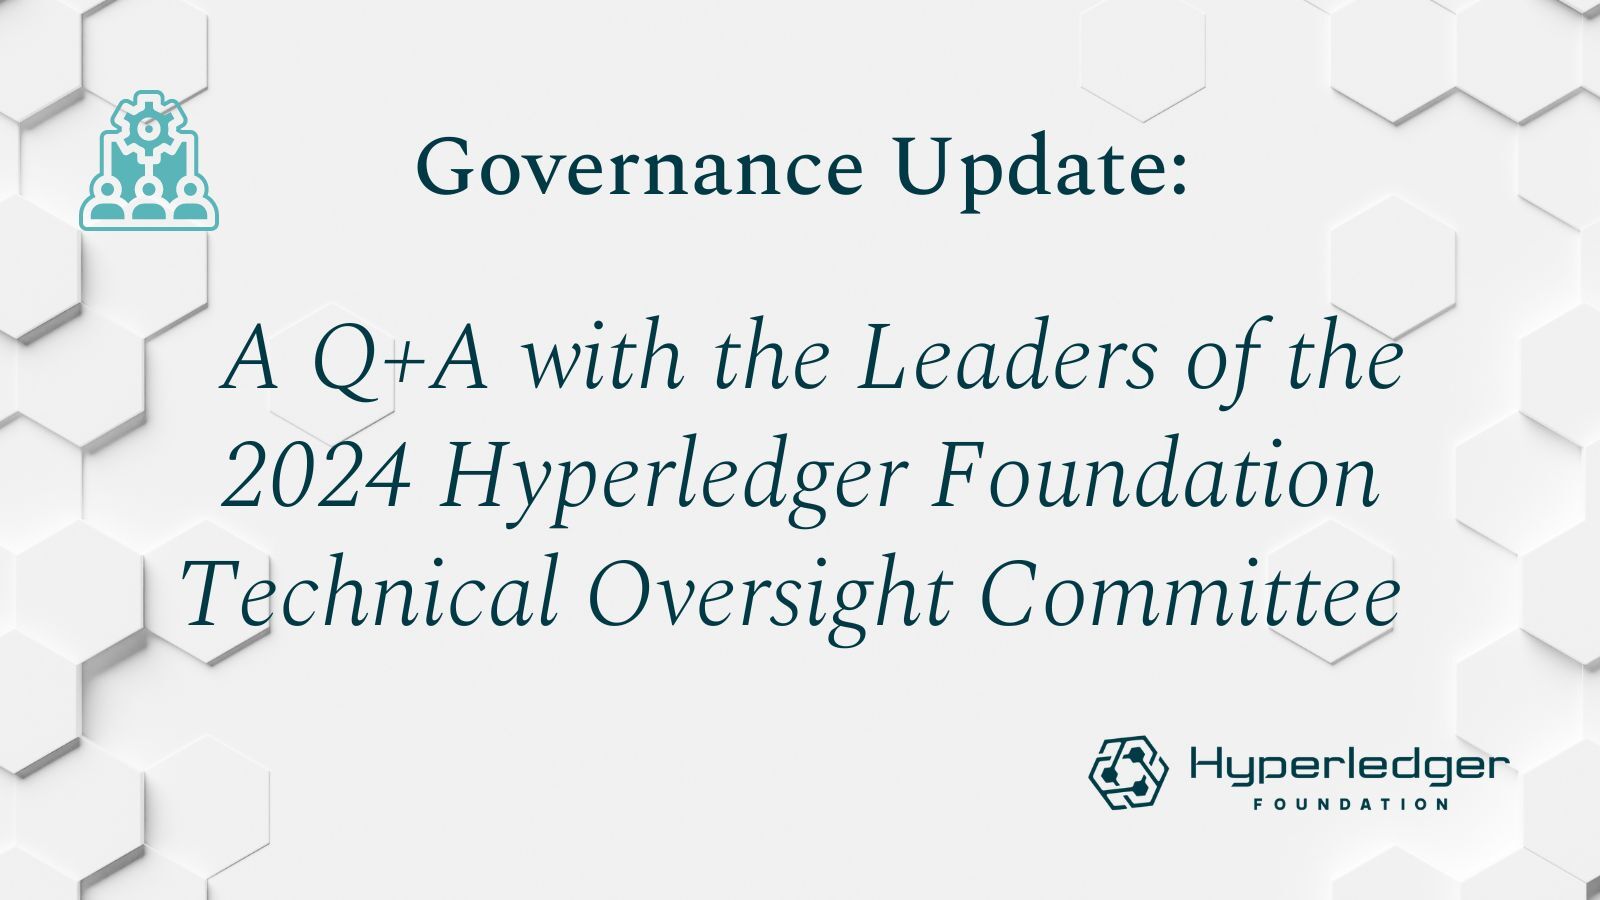 Governance Update: A Q+A with the Leaders of the 2024 Hyperledger Foundation Technical Oversight Committee